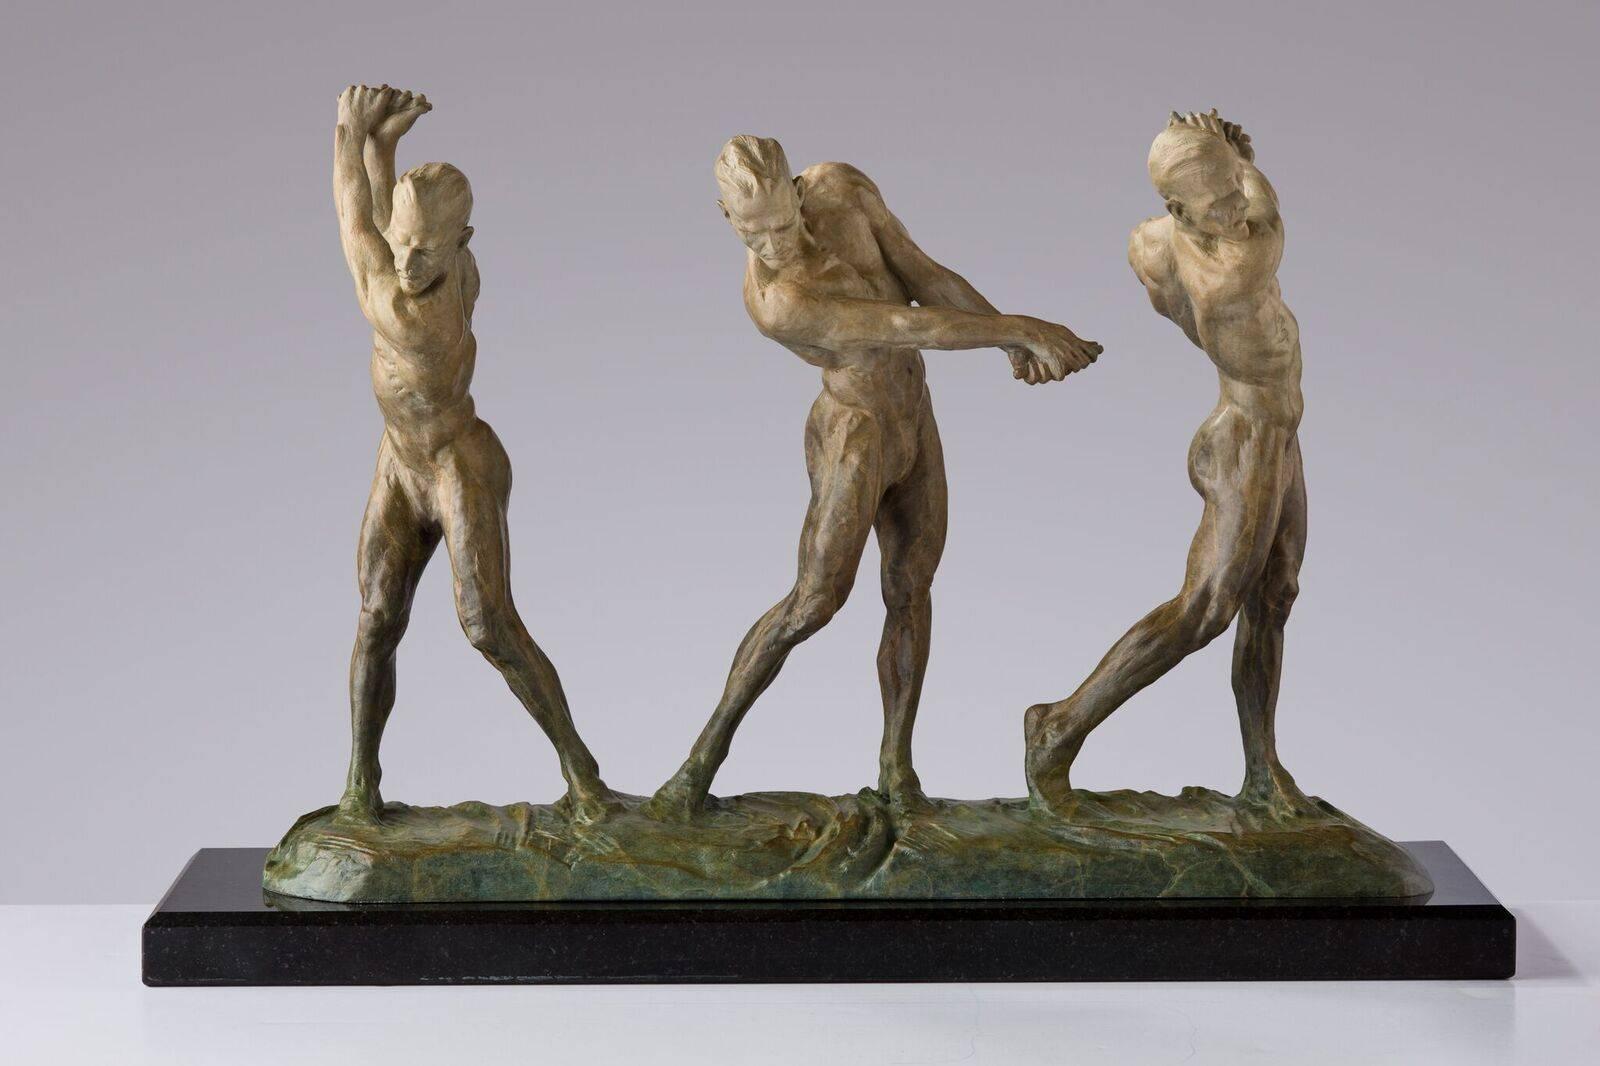 Anatomy of Golf, I, IV and V, Atelier - Contemporary Sculpture by Richard MacDonald